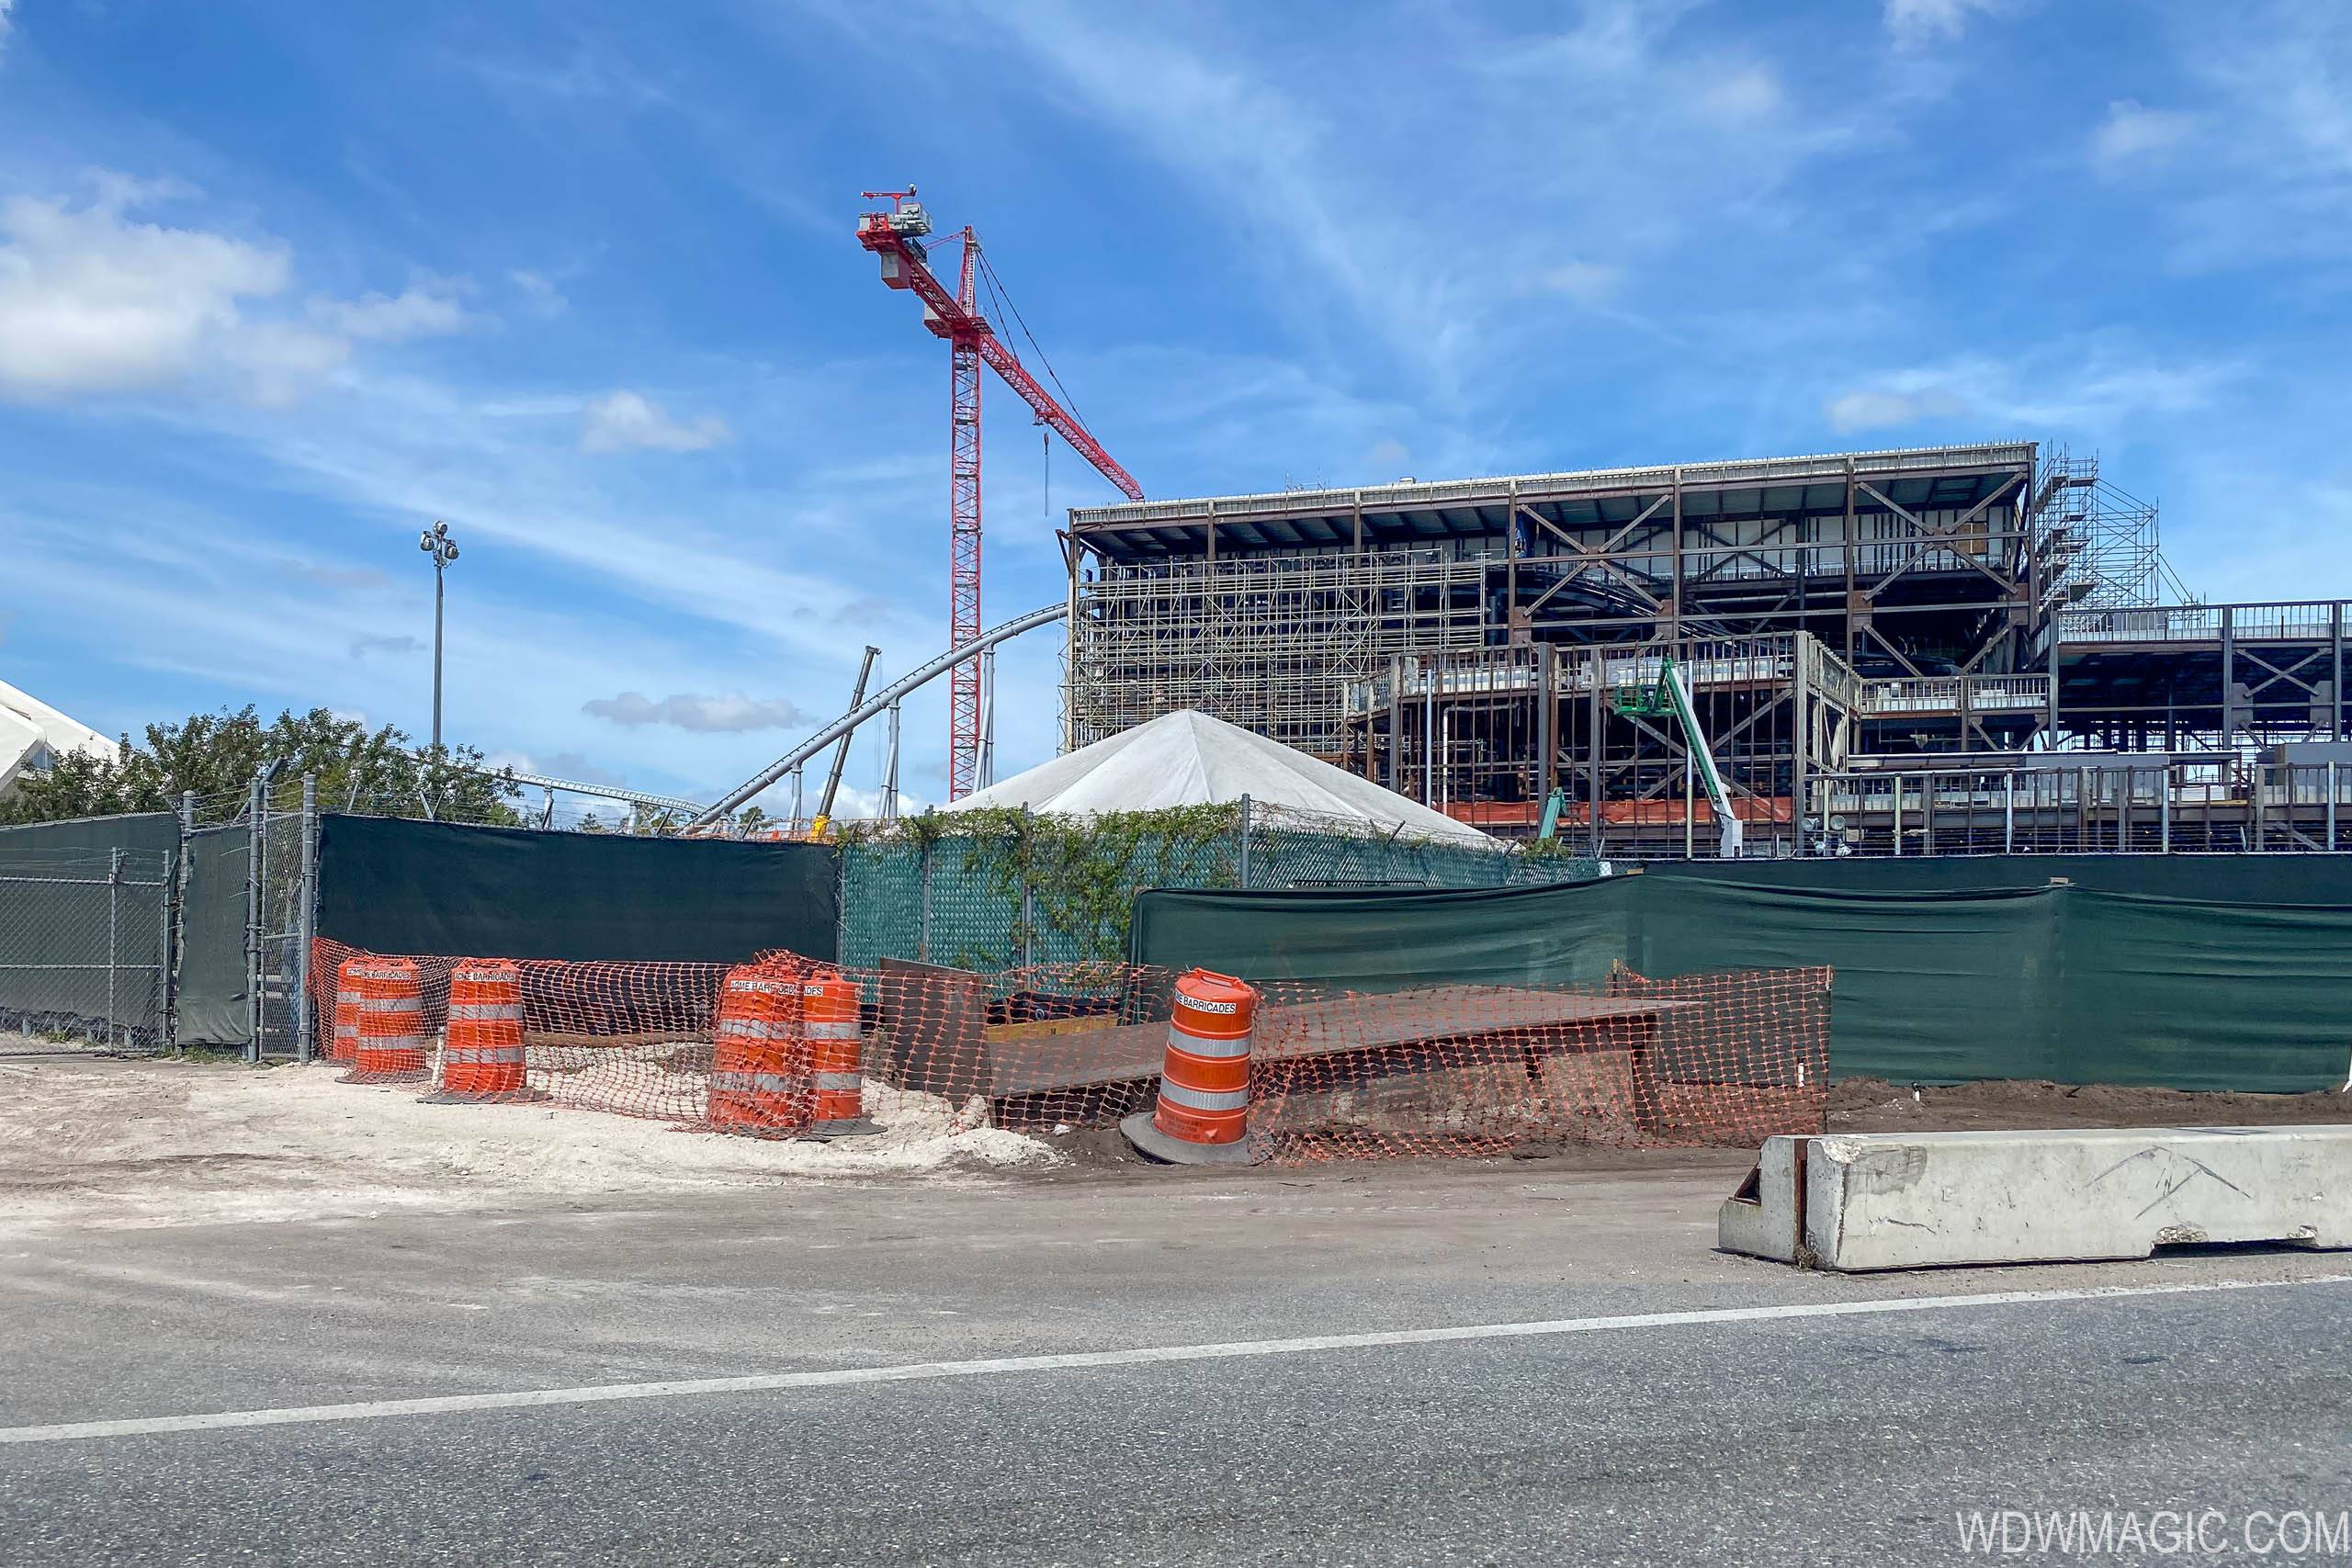 PHOTOS - Construction on some new projects comes to a halt at Walt Disney World